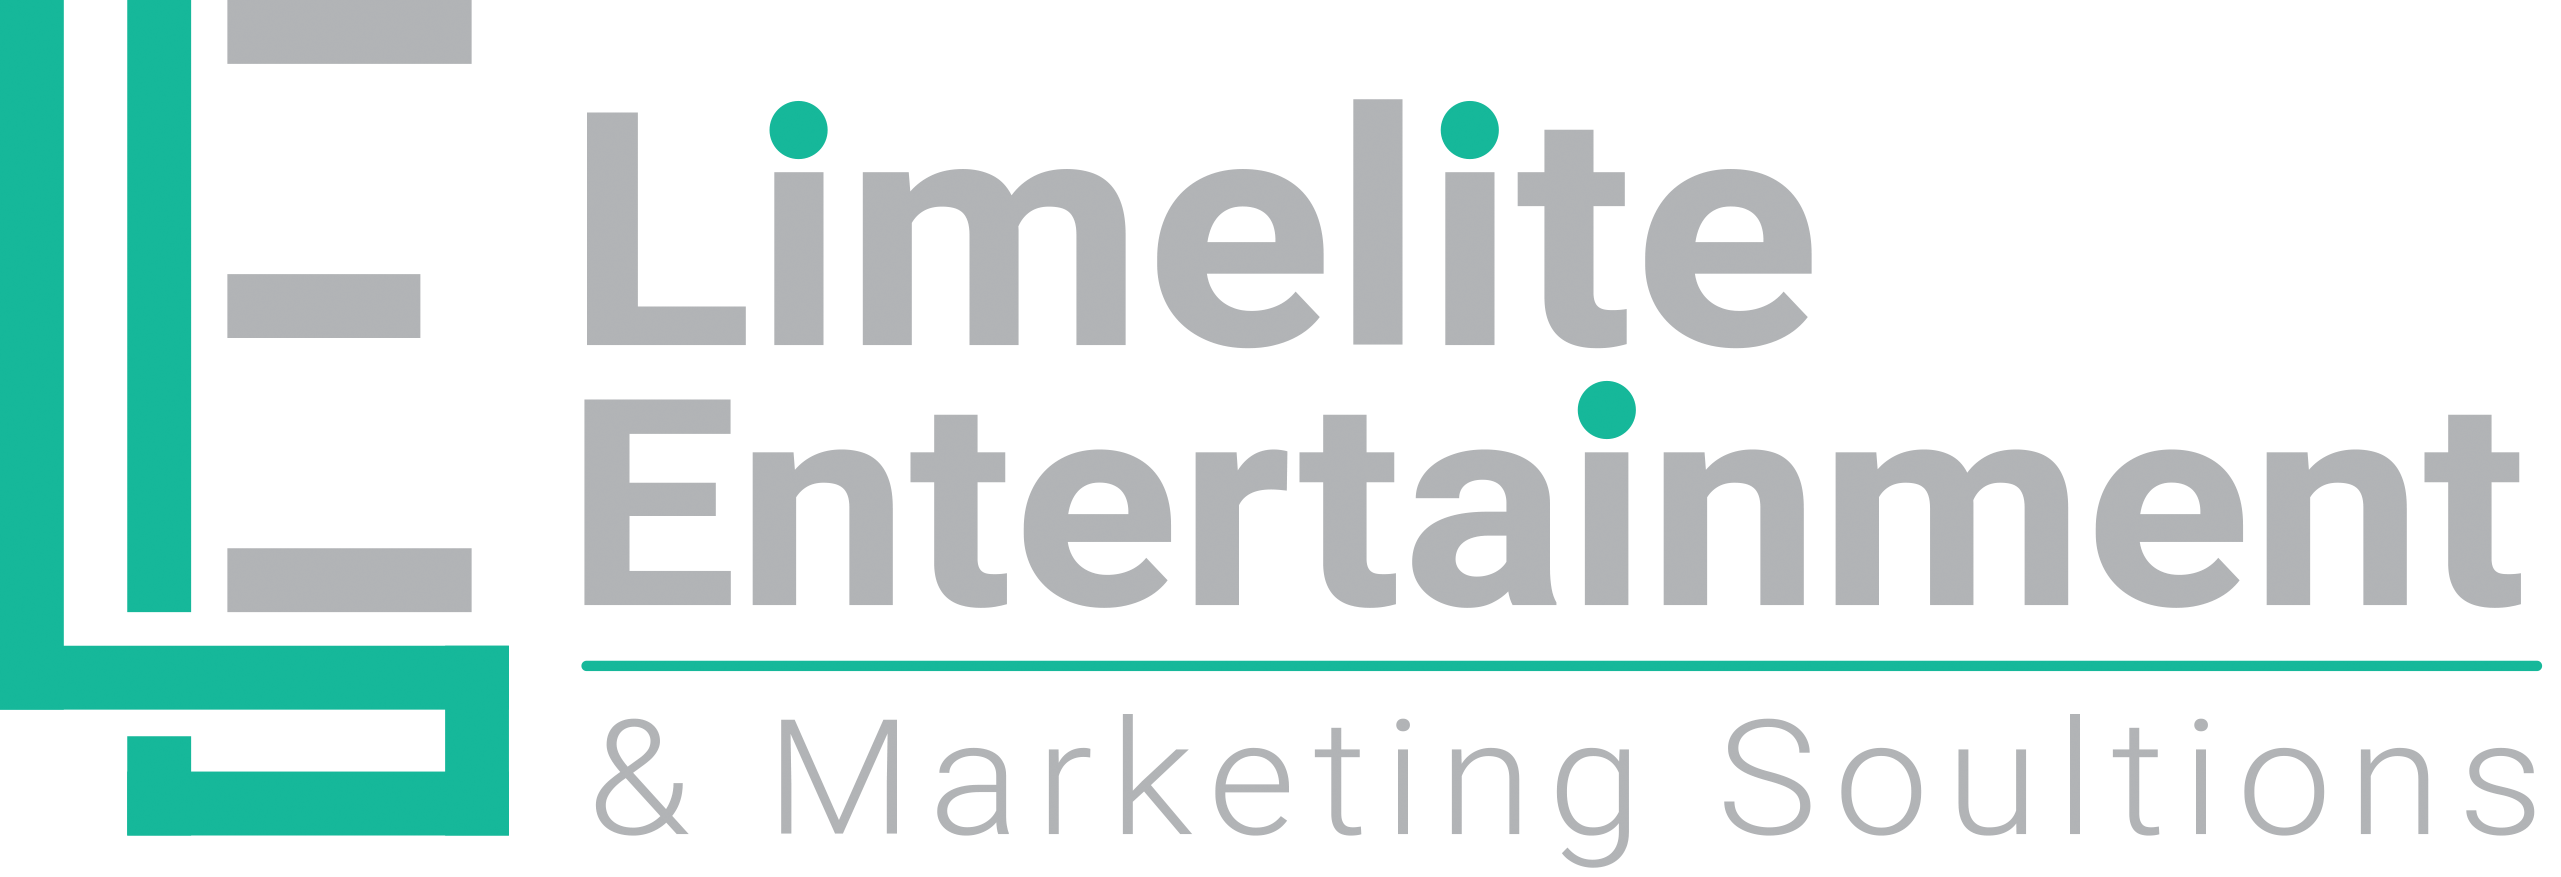 https://www.pakpositions.com/company/limelite-entertainment-markeitng-solutions